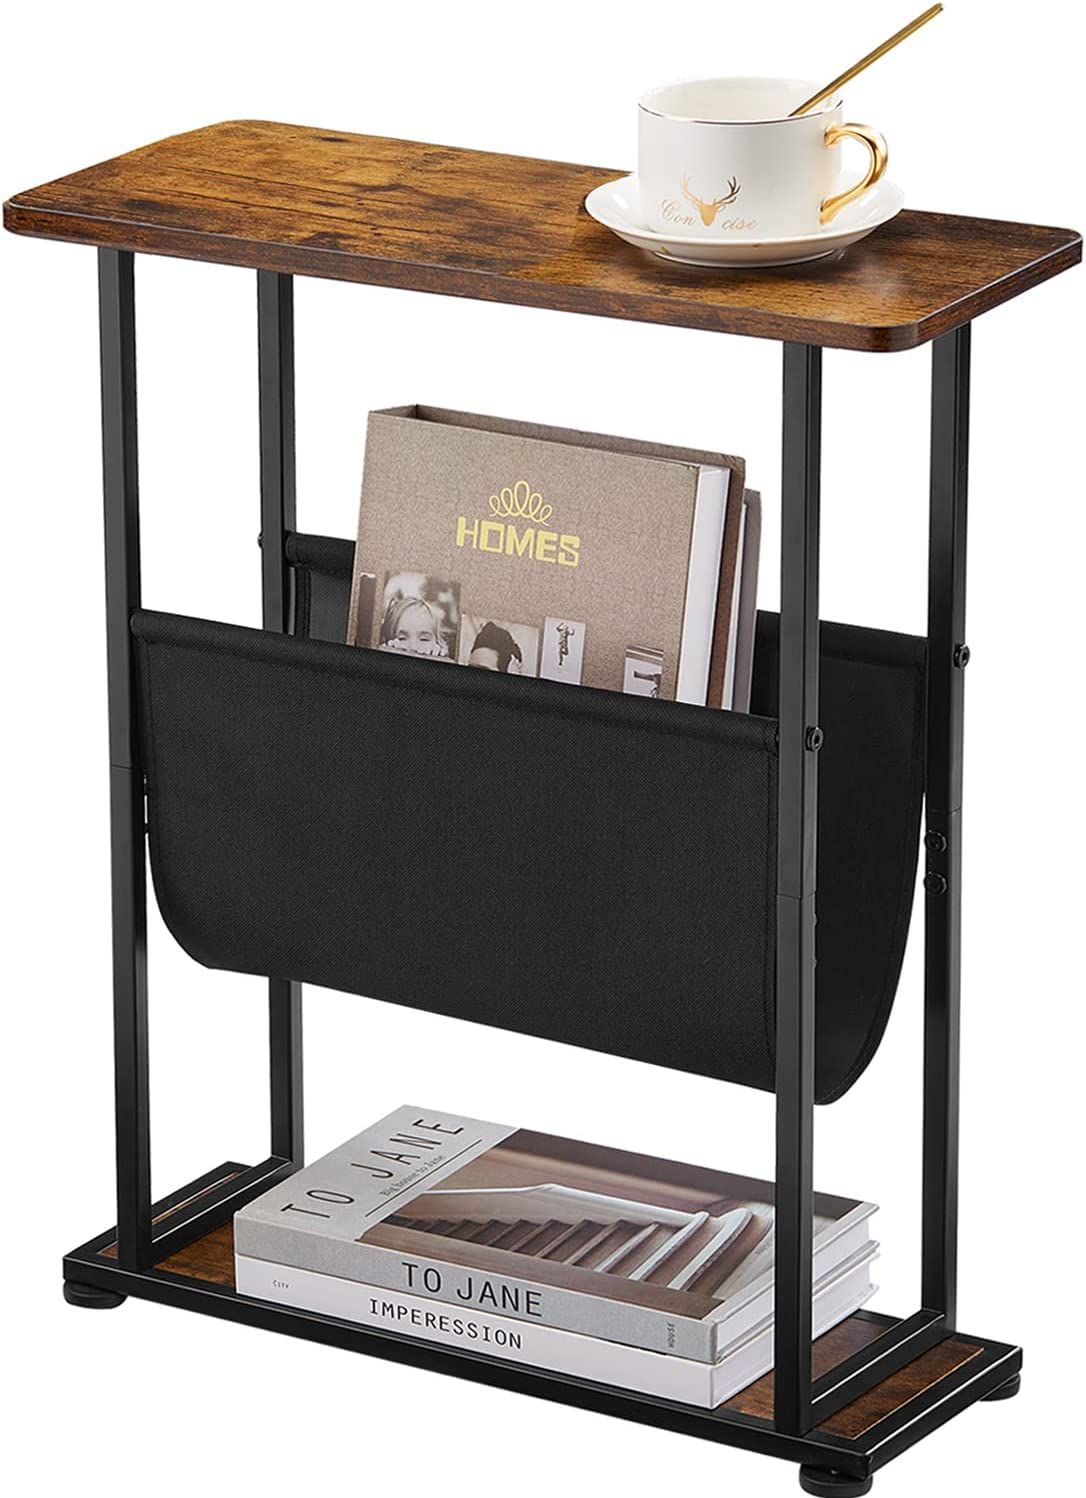 narrow end table with wooden top, black metal legs, and a canvas shelf underneath 